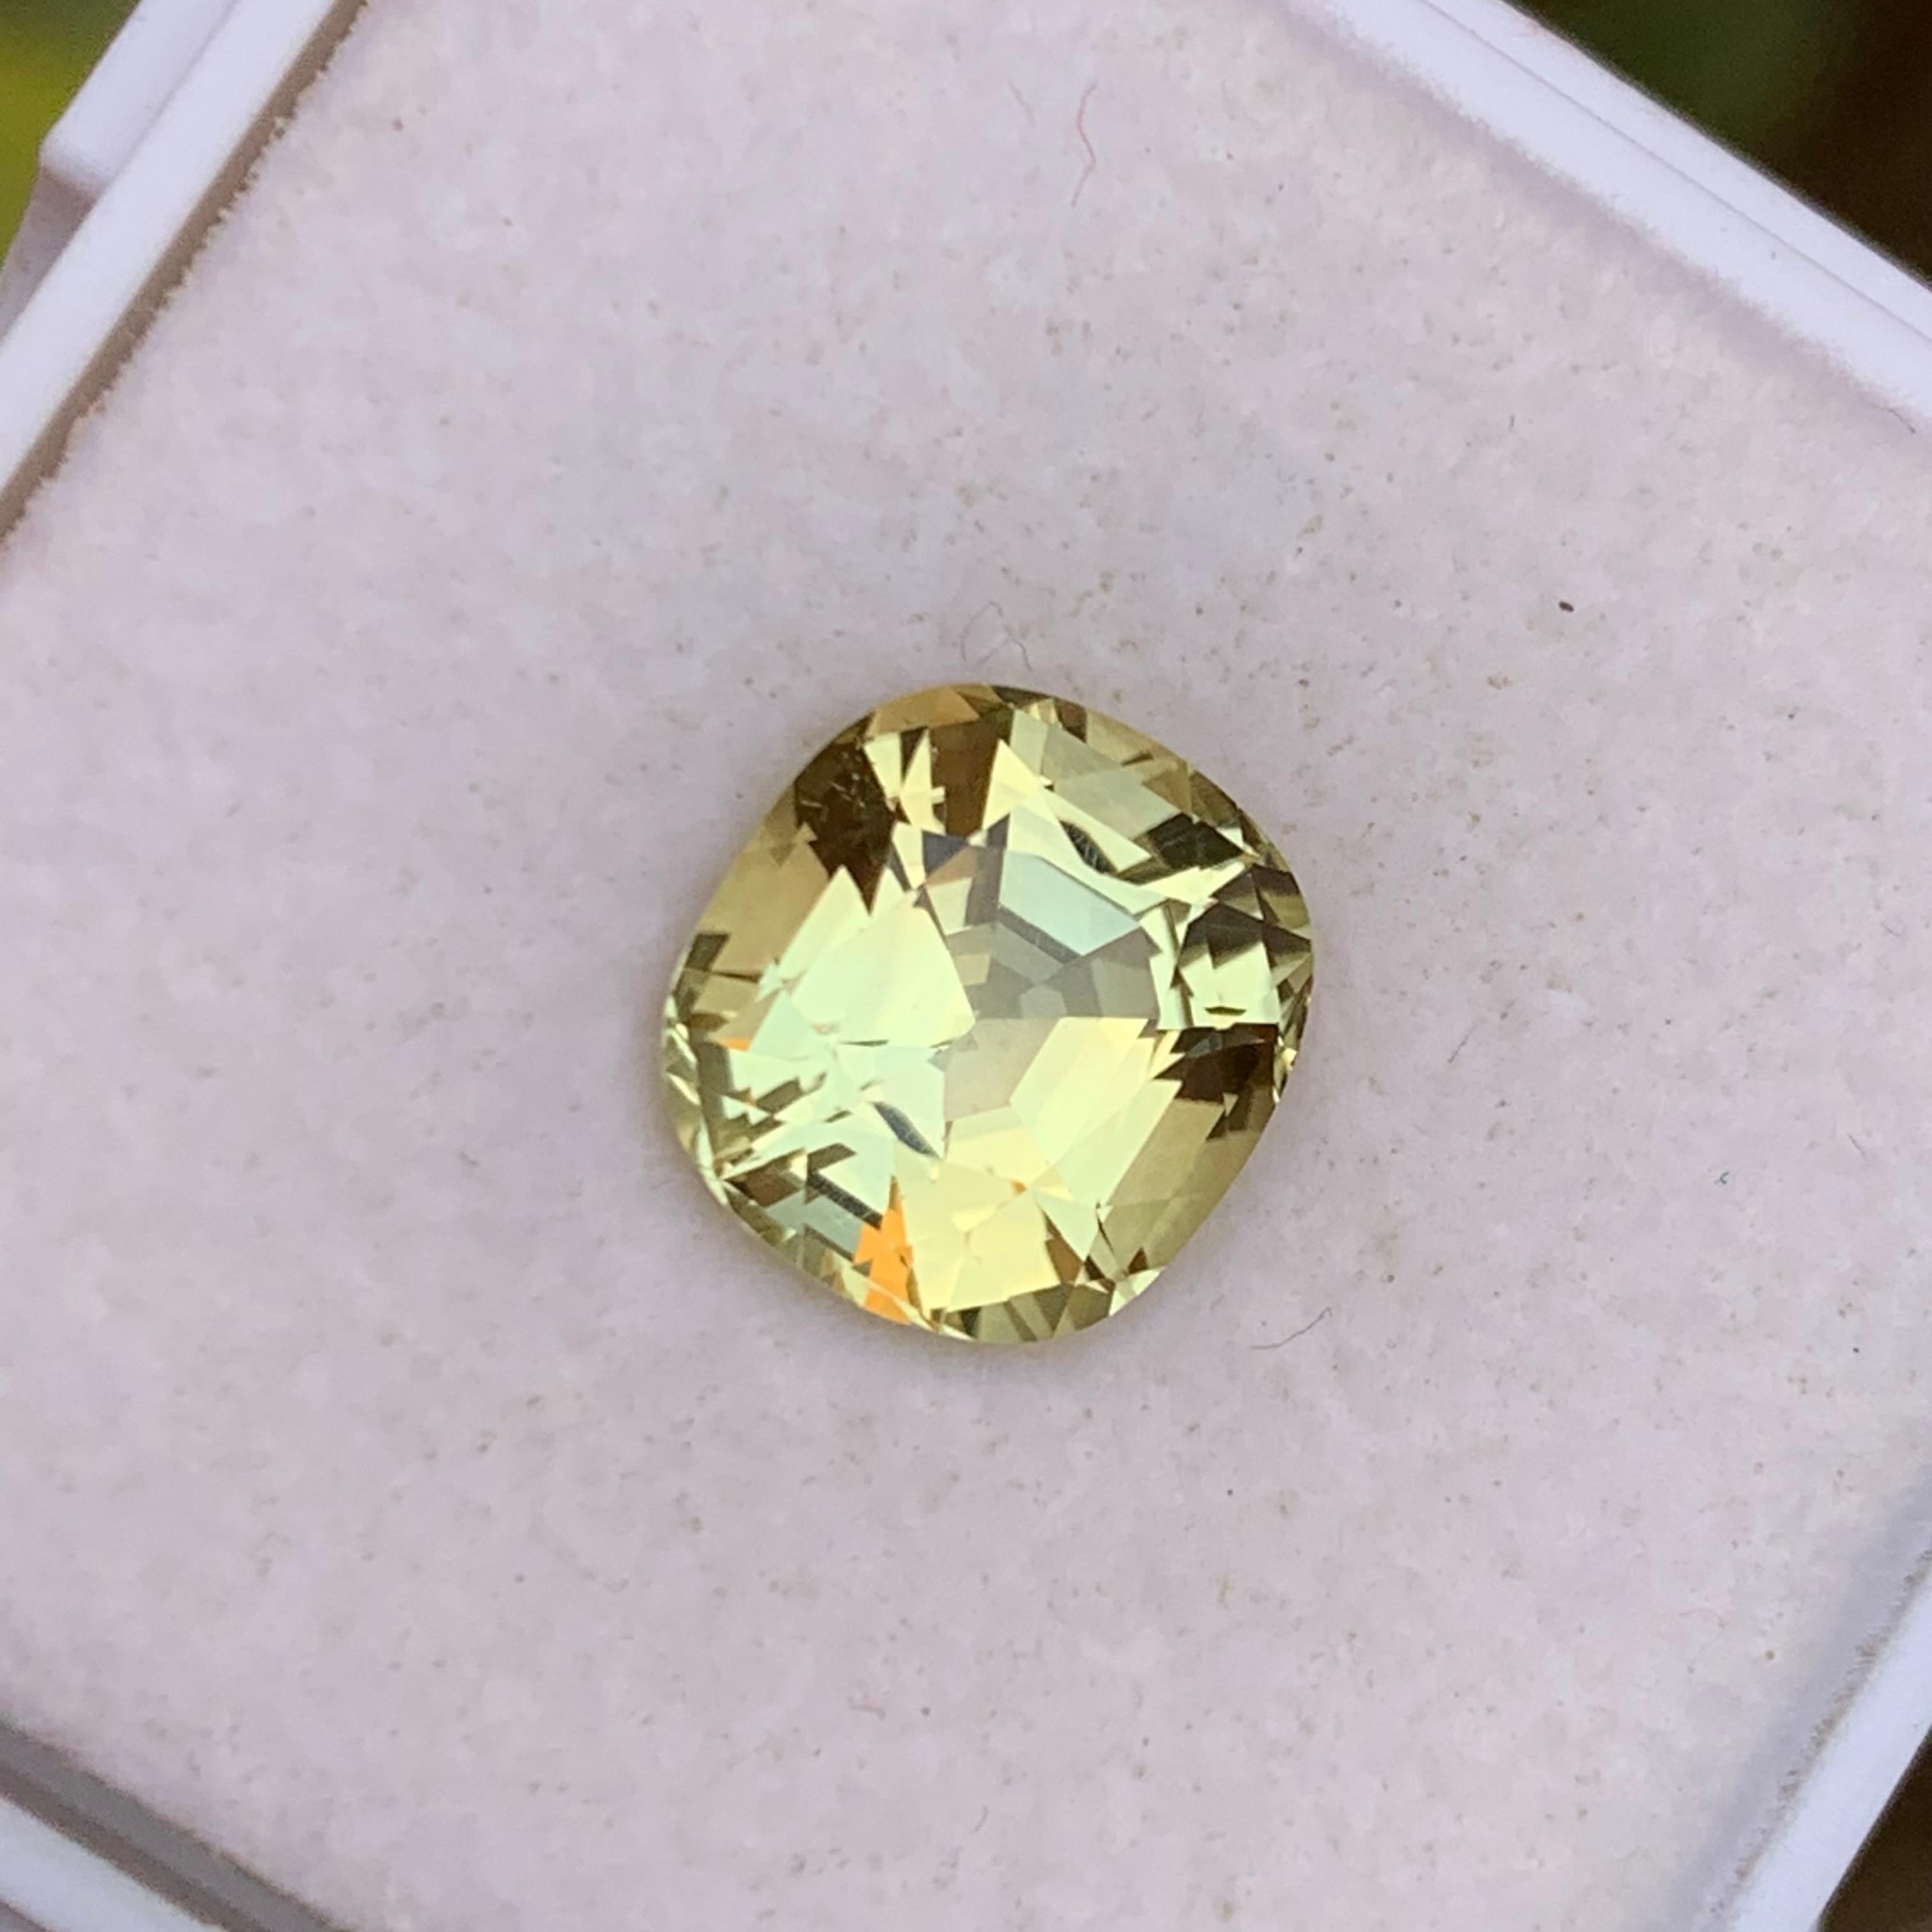 Rare Light Golden Yellow Natural Tourmaline Gemstone 4.15Ct Cushion Cut for Ring For Sale 5